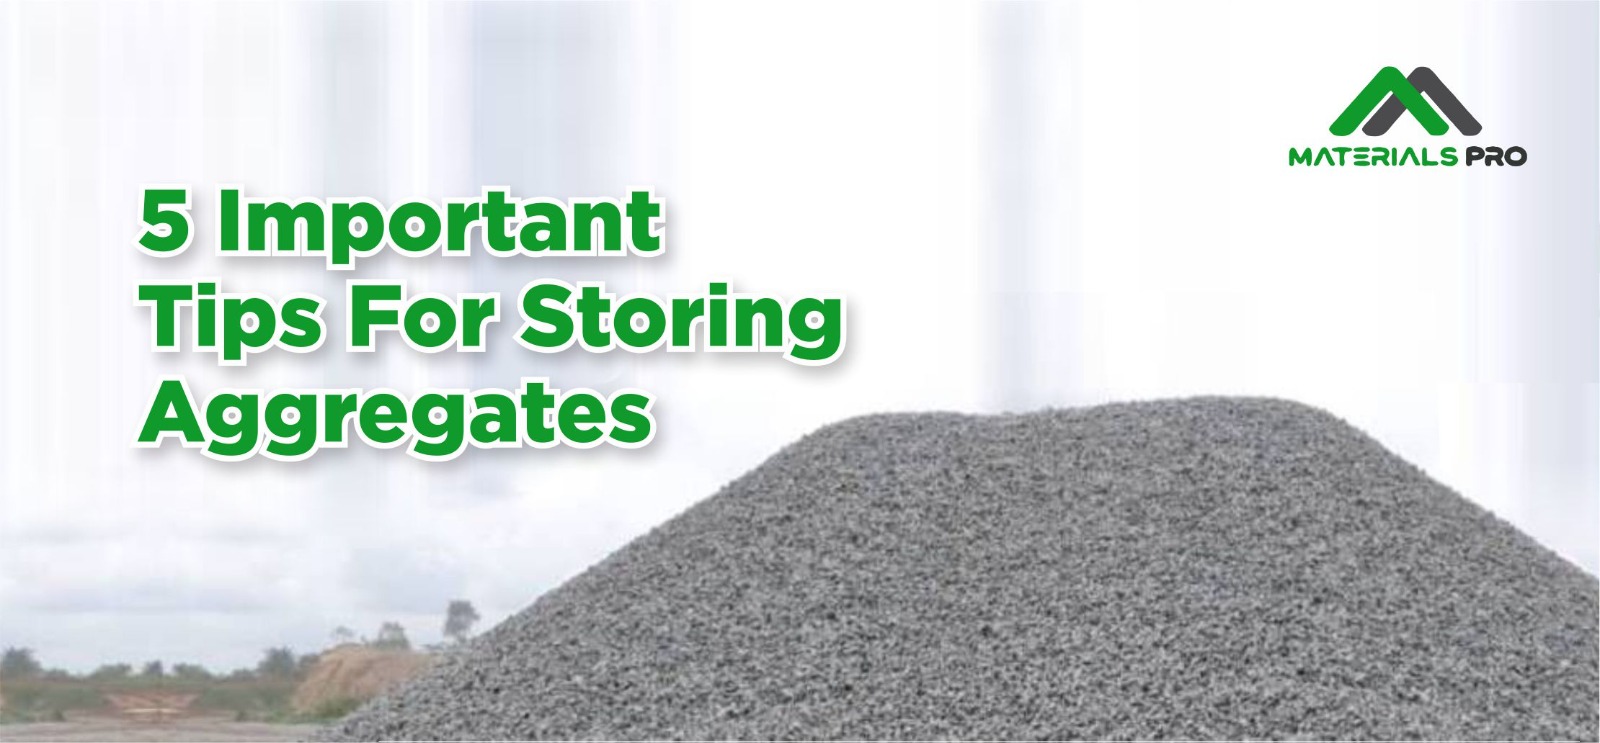 5 Important Tips for Storing Aggregates